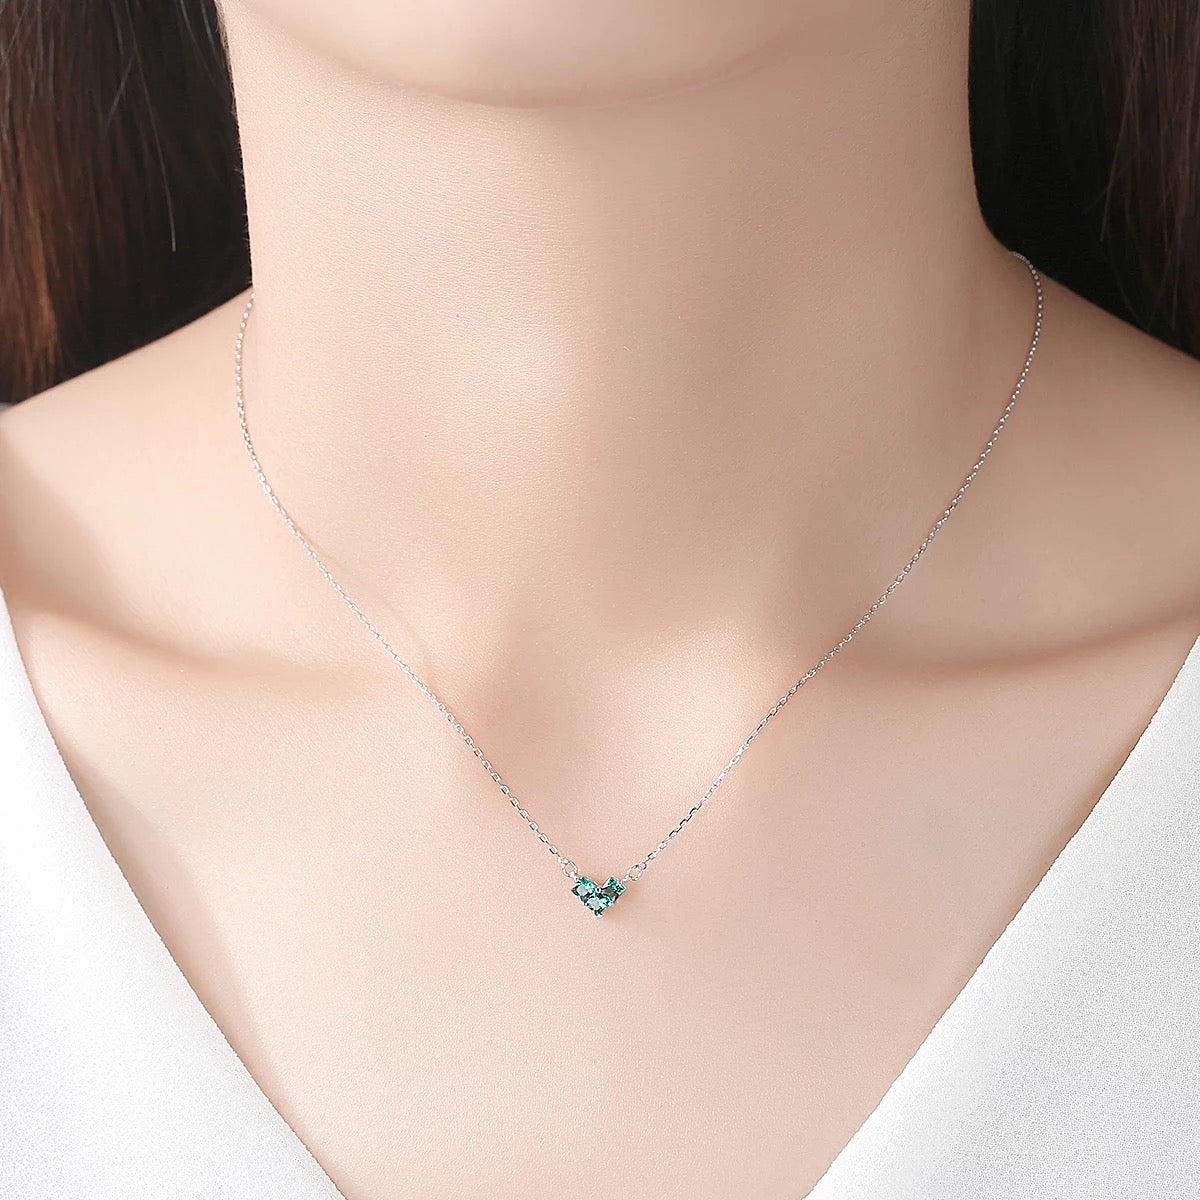 V Necklace - Red or Green